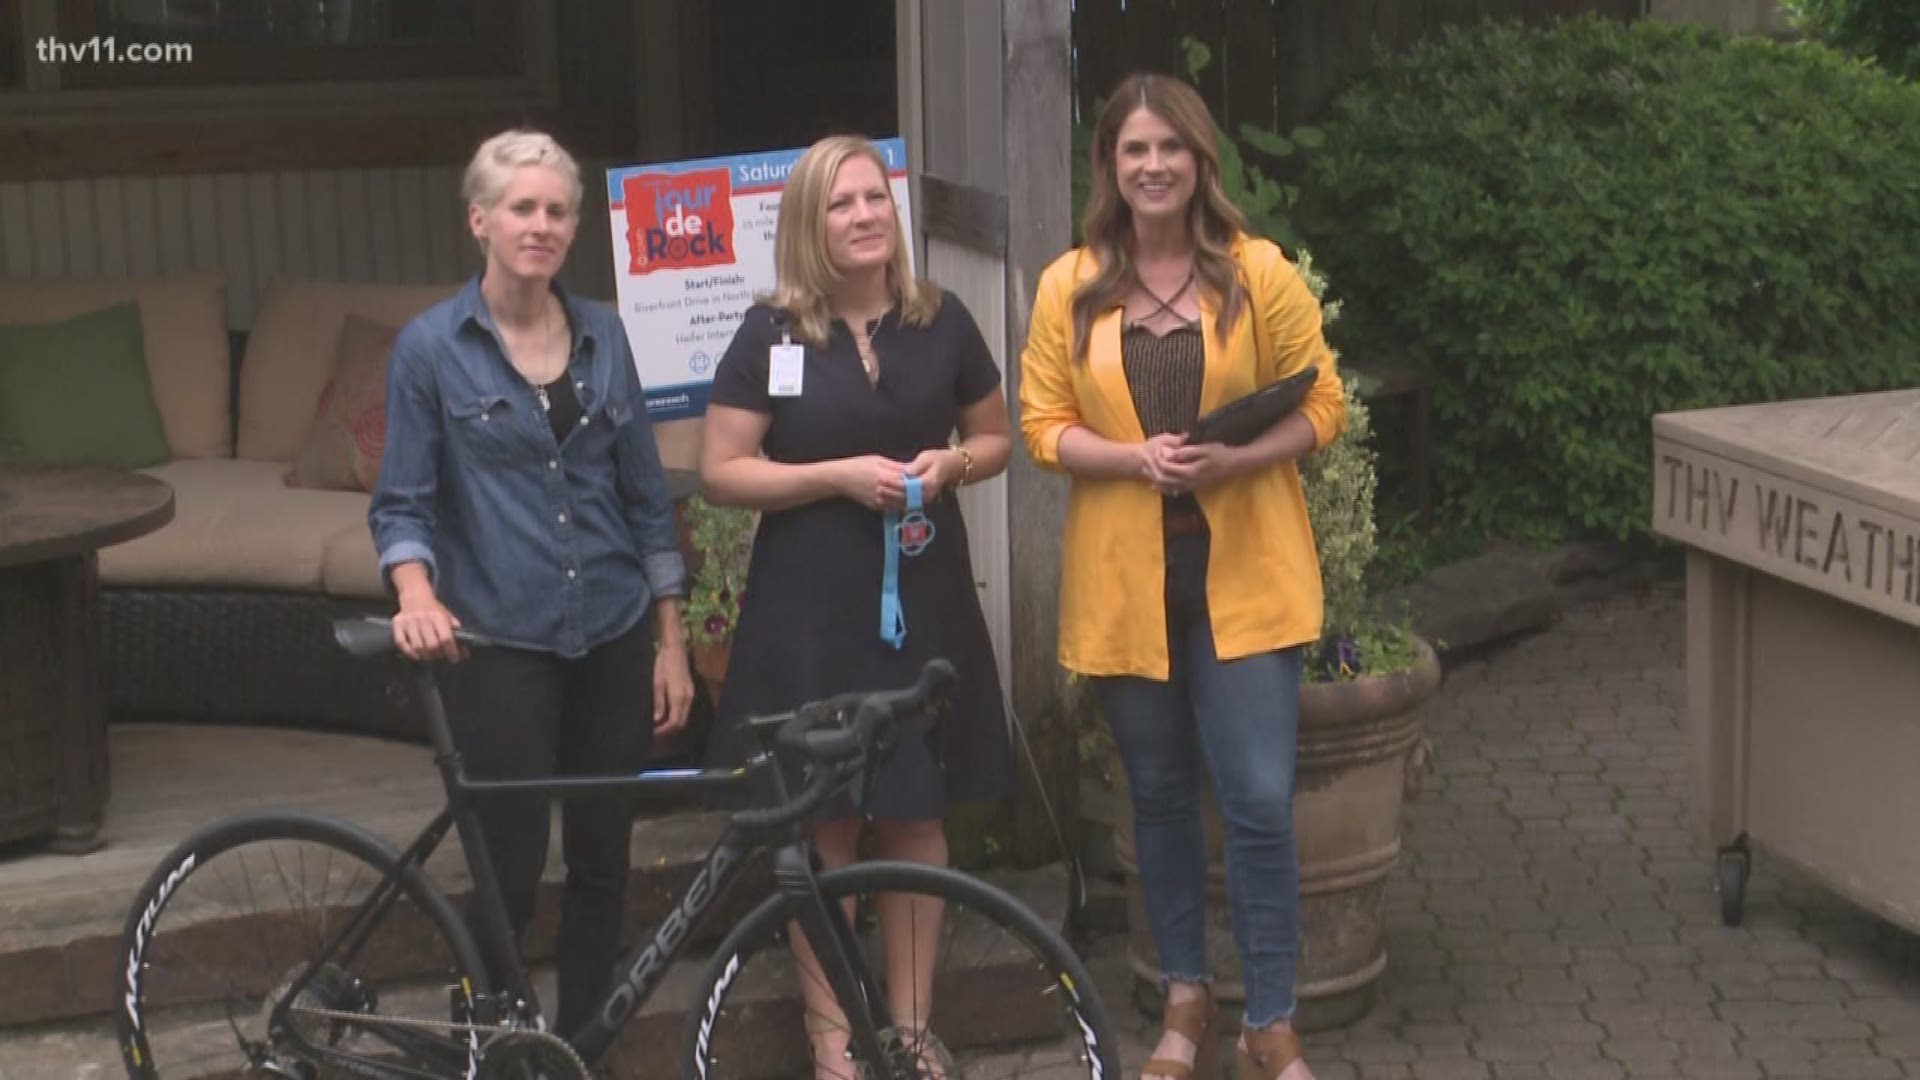 Tour de Rock will attract hundreds of cyclists to Little Rock for a benefit ride for CARTI.